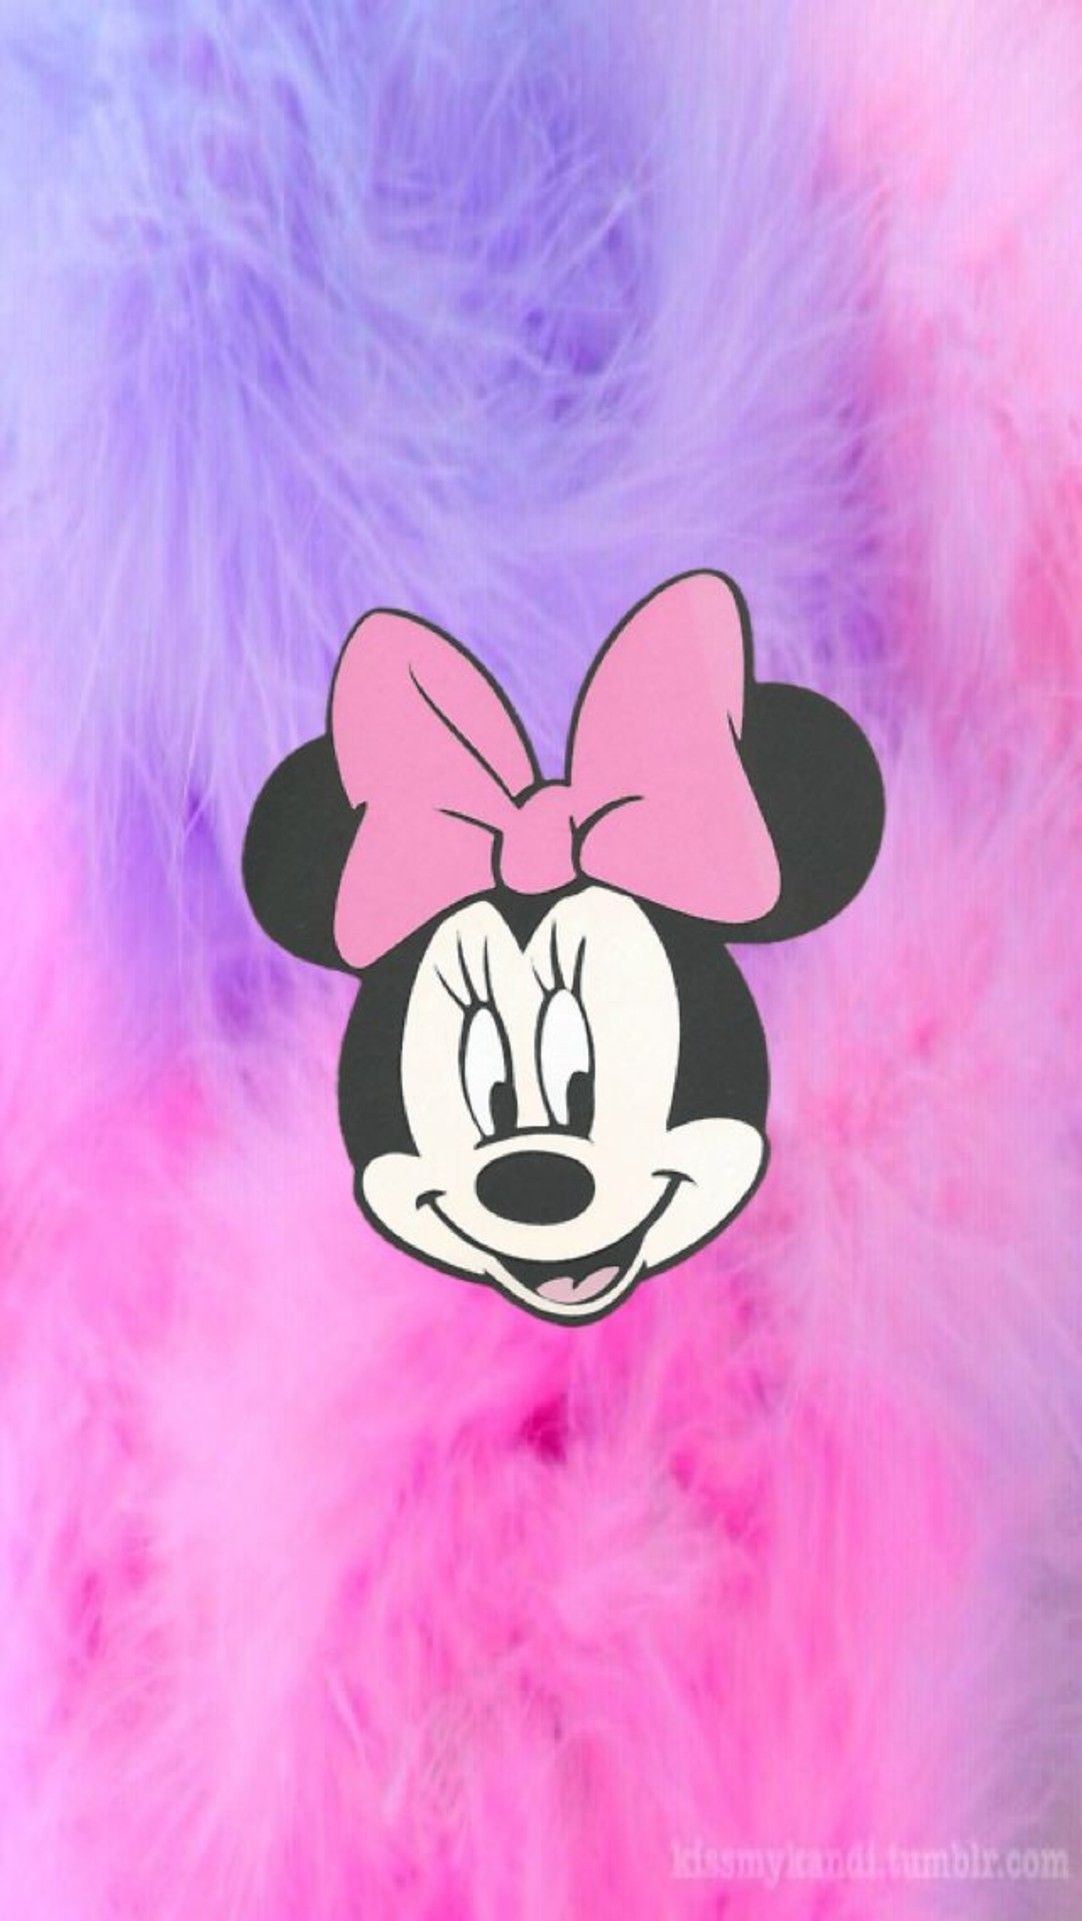 Minnie Mouse iPhone Wallpaper, HD Minnie Mouse iPhone Background on WallpaperBat